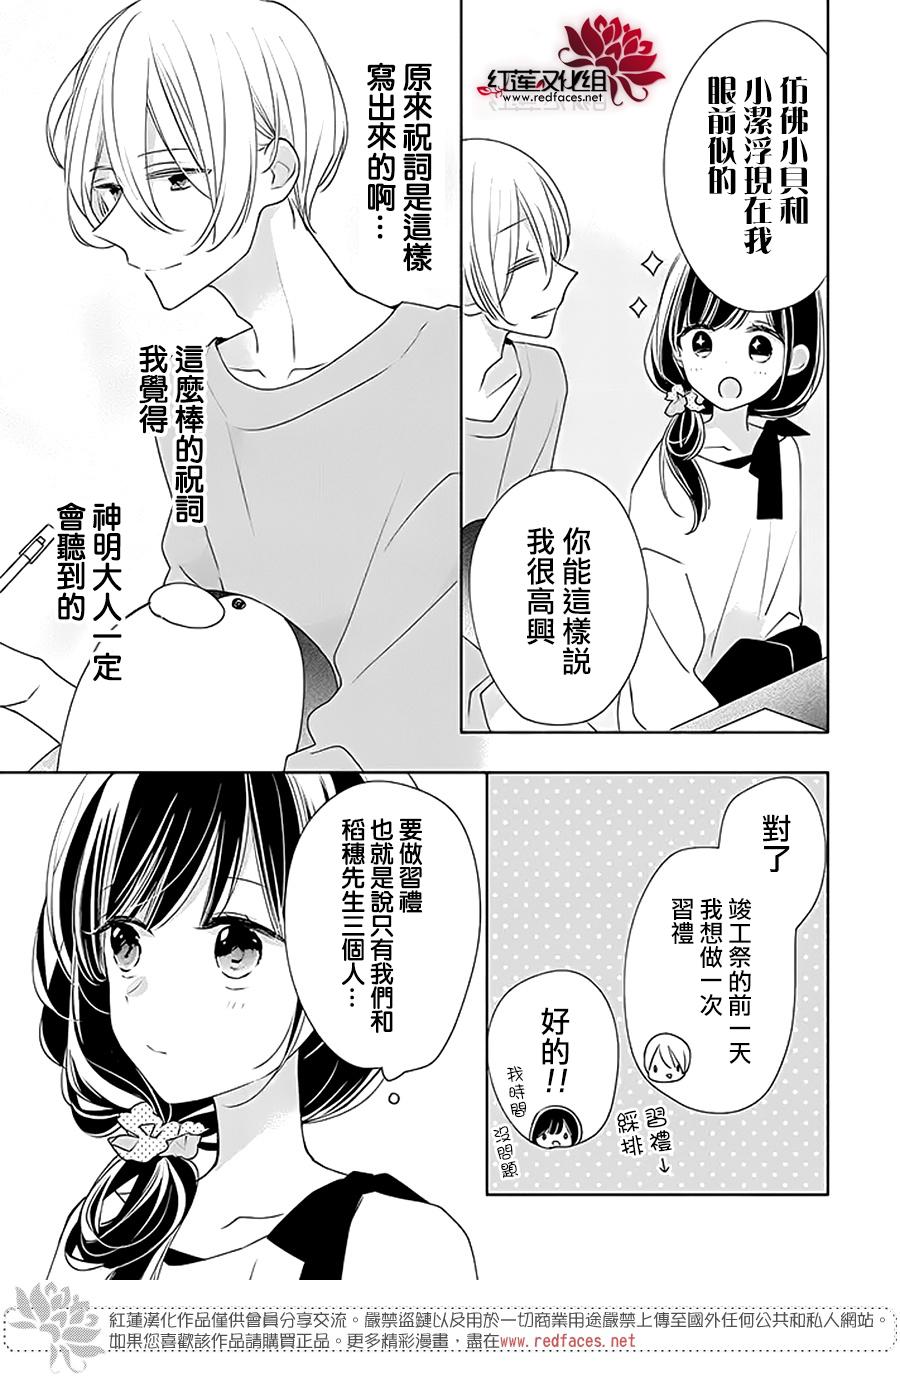 If given a second chance - 31話 - 3